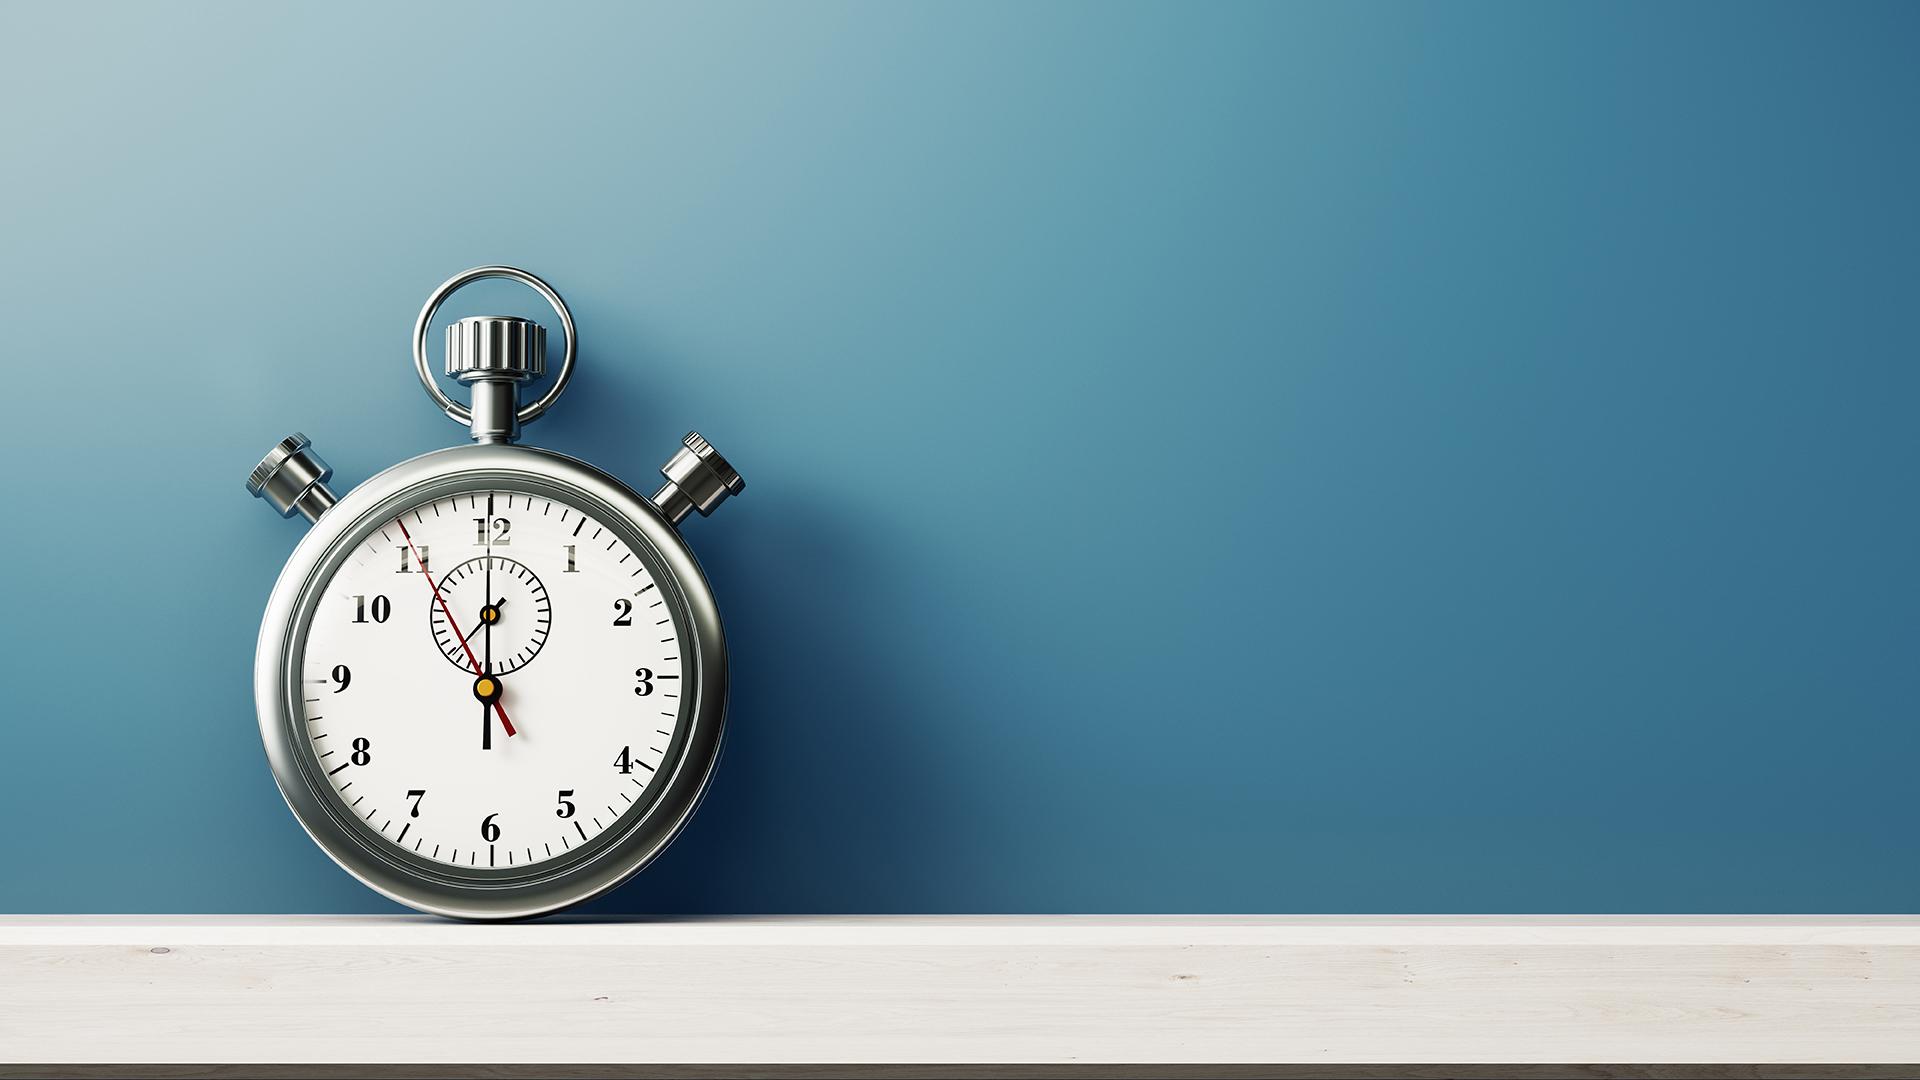 Silver Colored Stopwatch In Front of Blue Wall